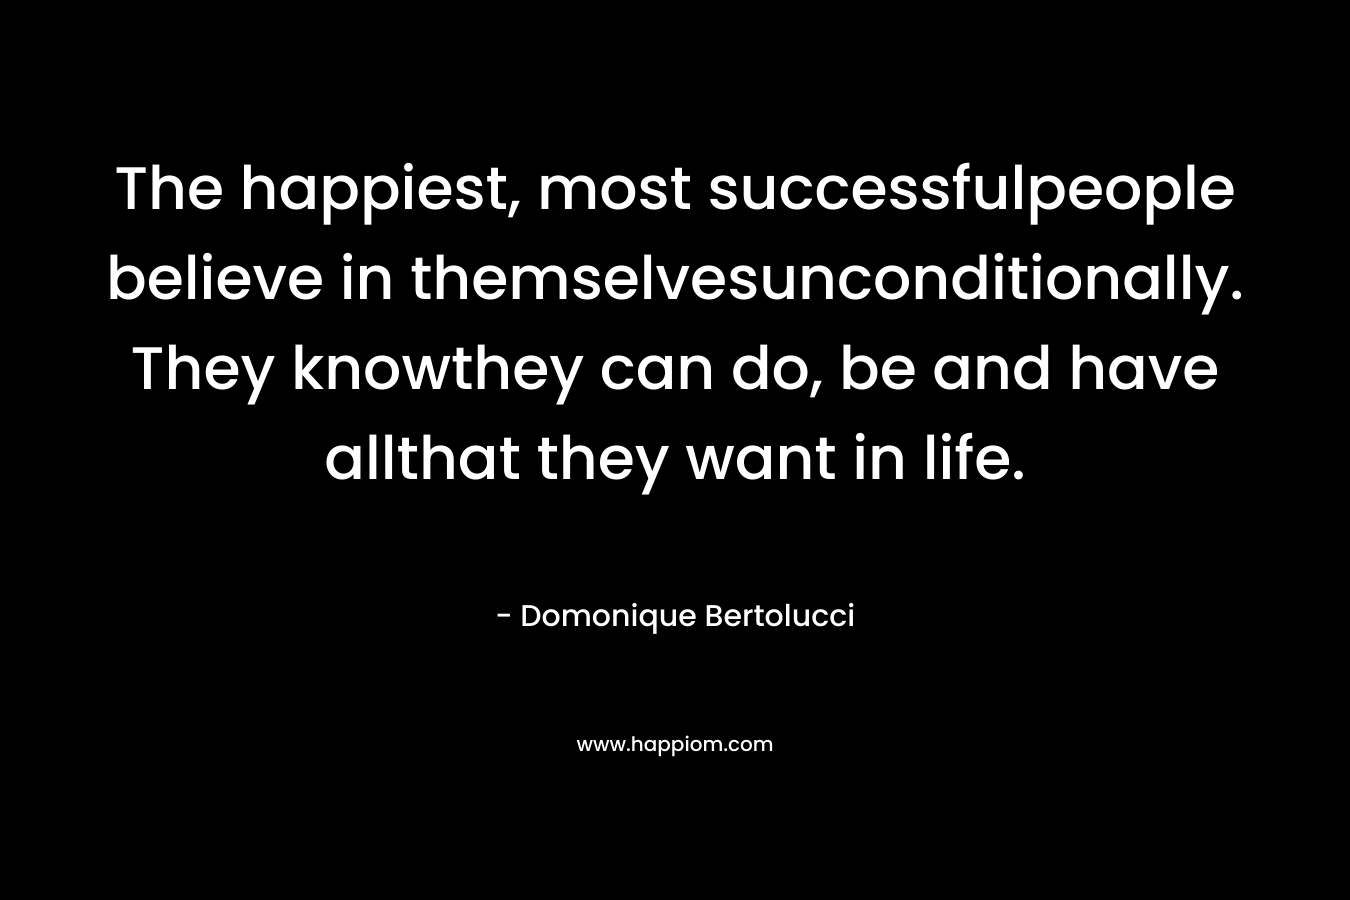 The happiest, most successfulpeople believe in themselvesunconditionally. They knowthey can do, be and have allthat they want in life. – Domonique Bertolucci